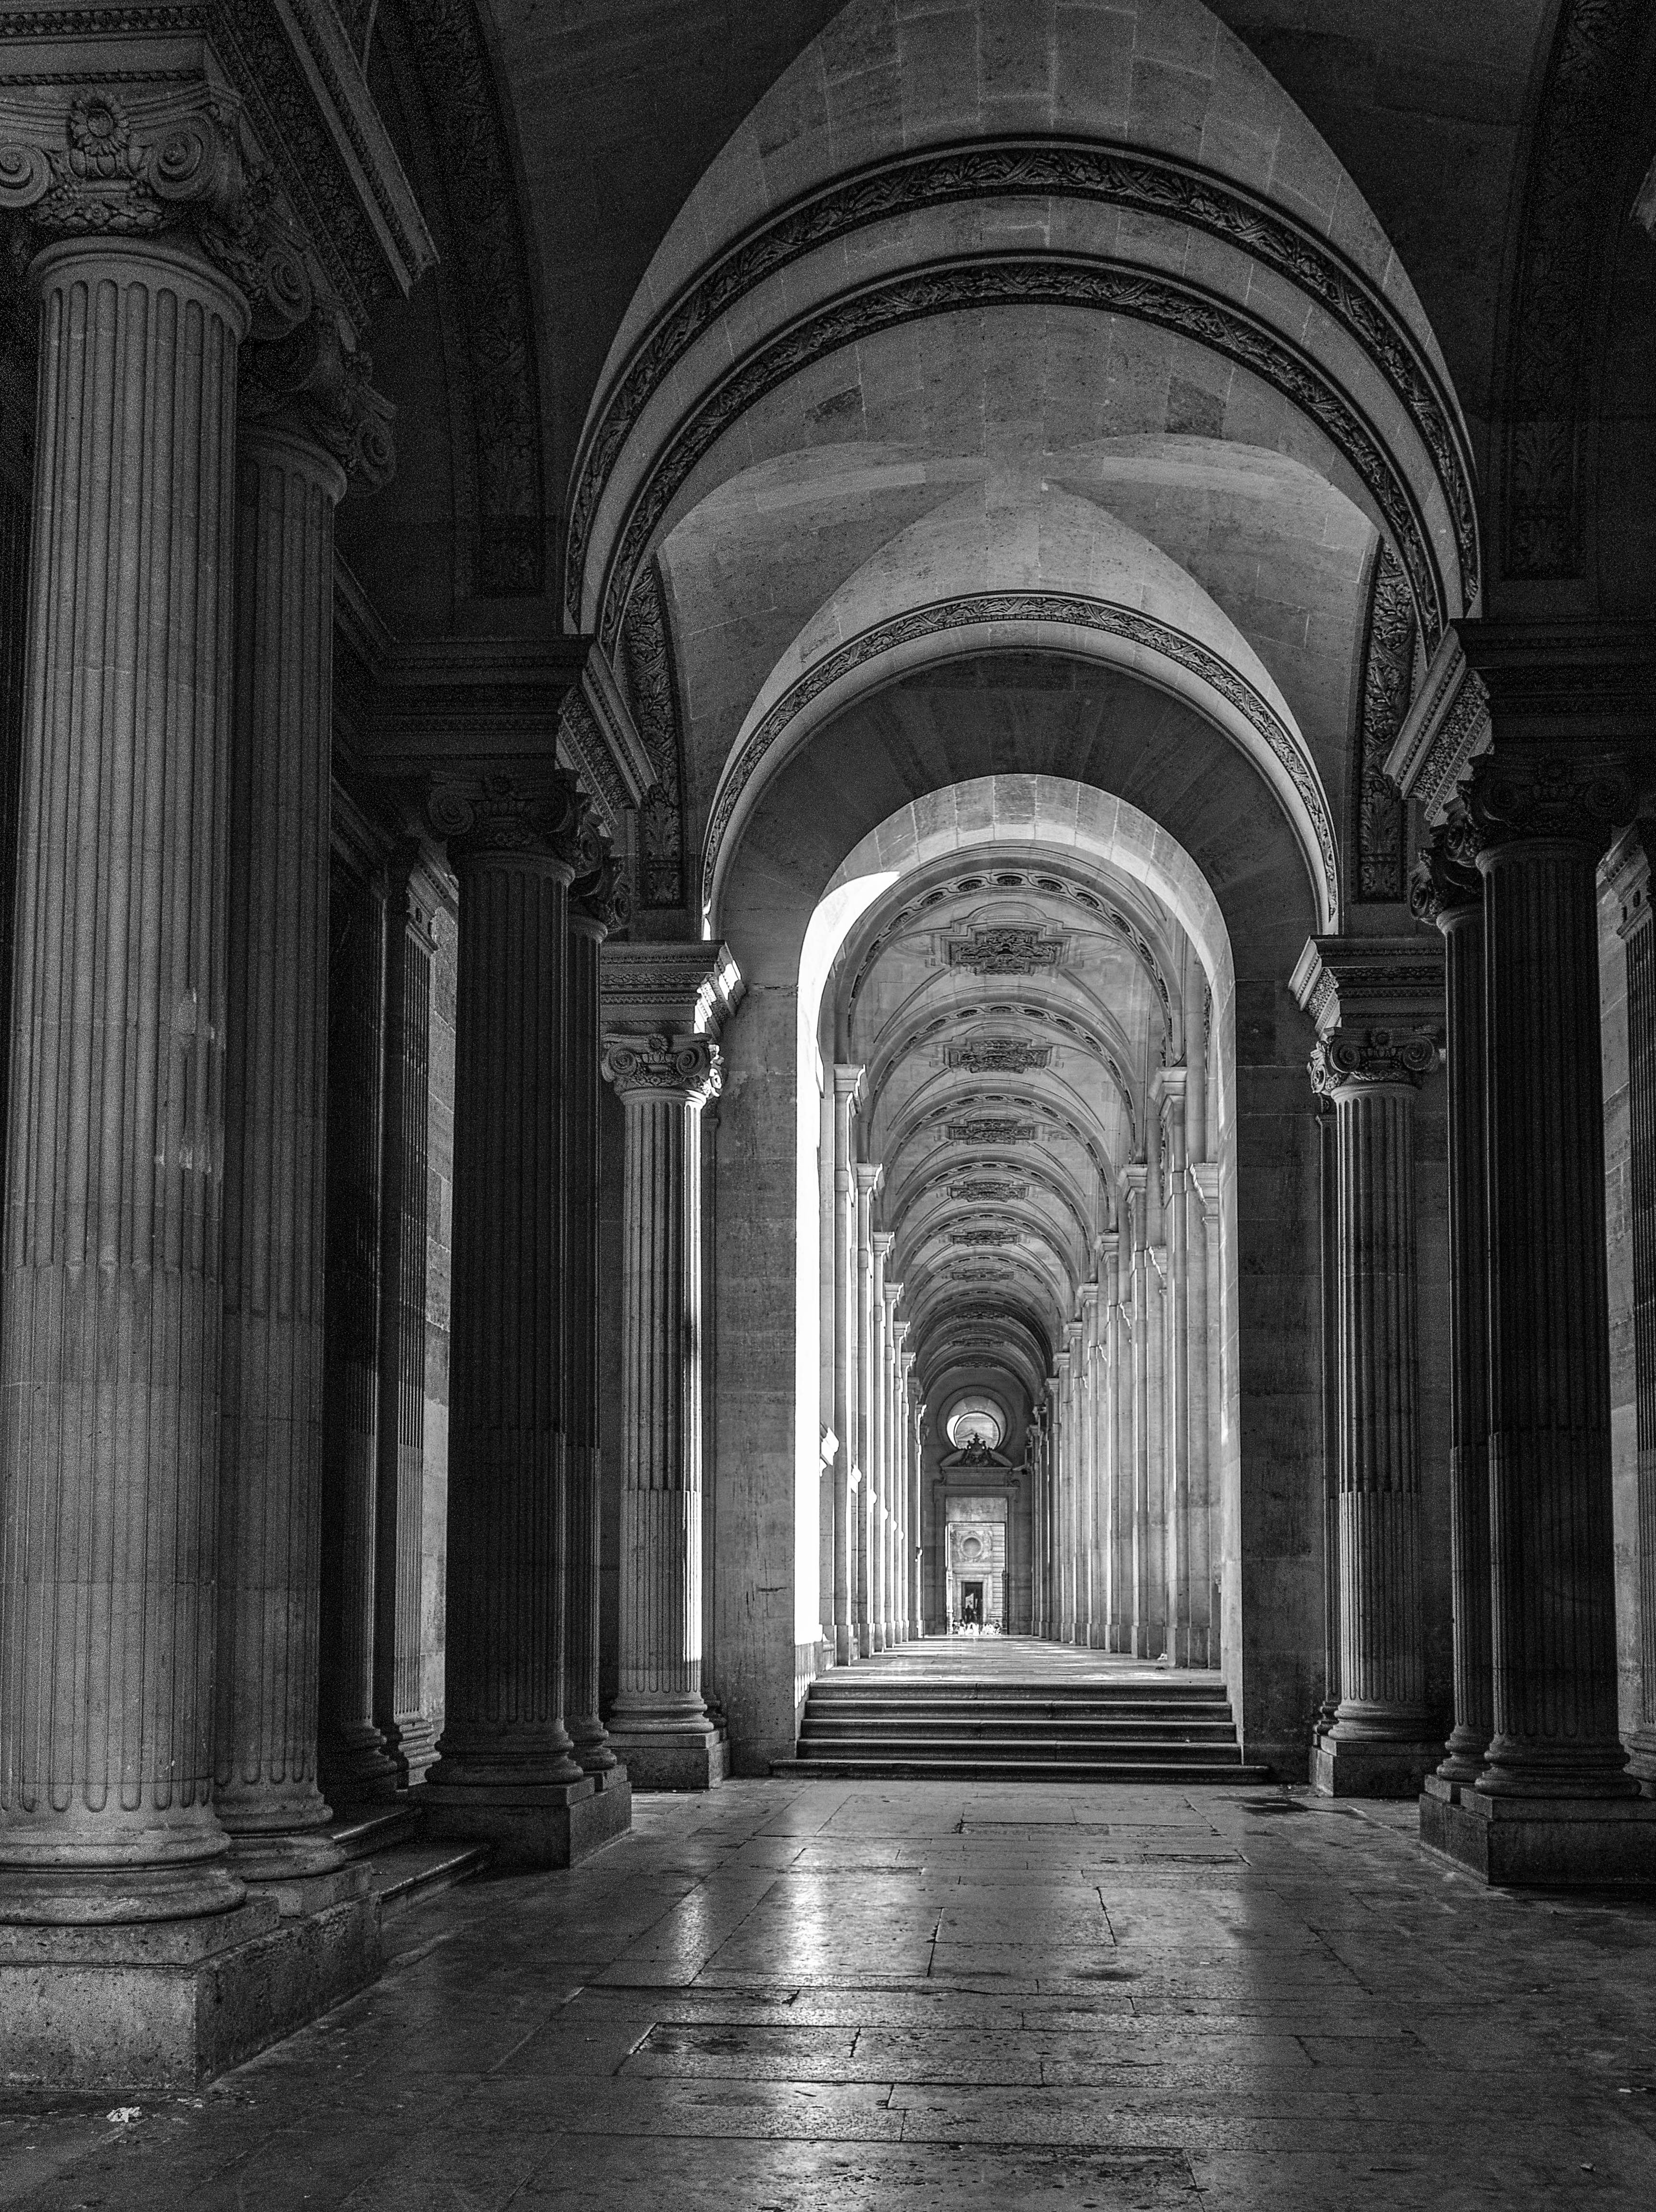 Hallway in the Louvre - BW